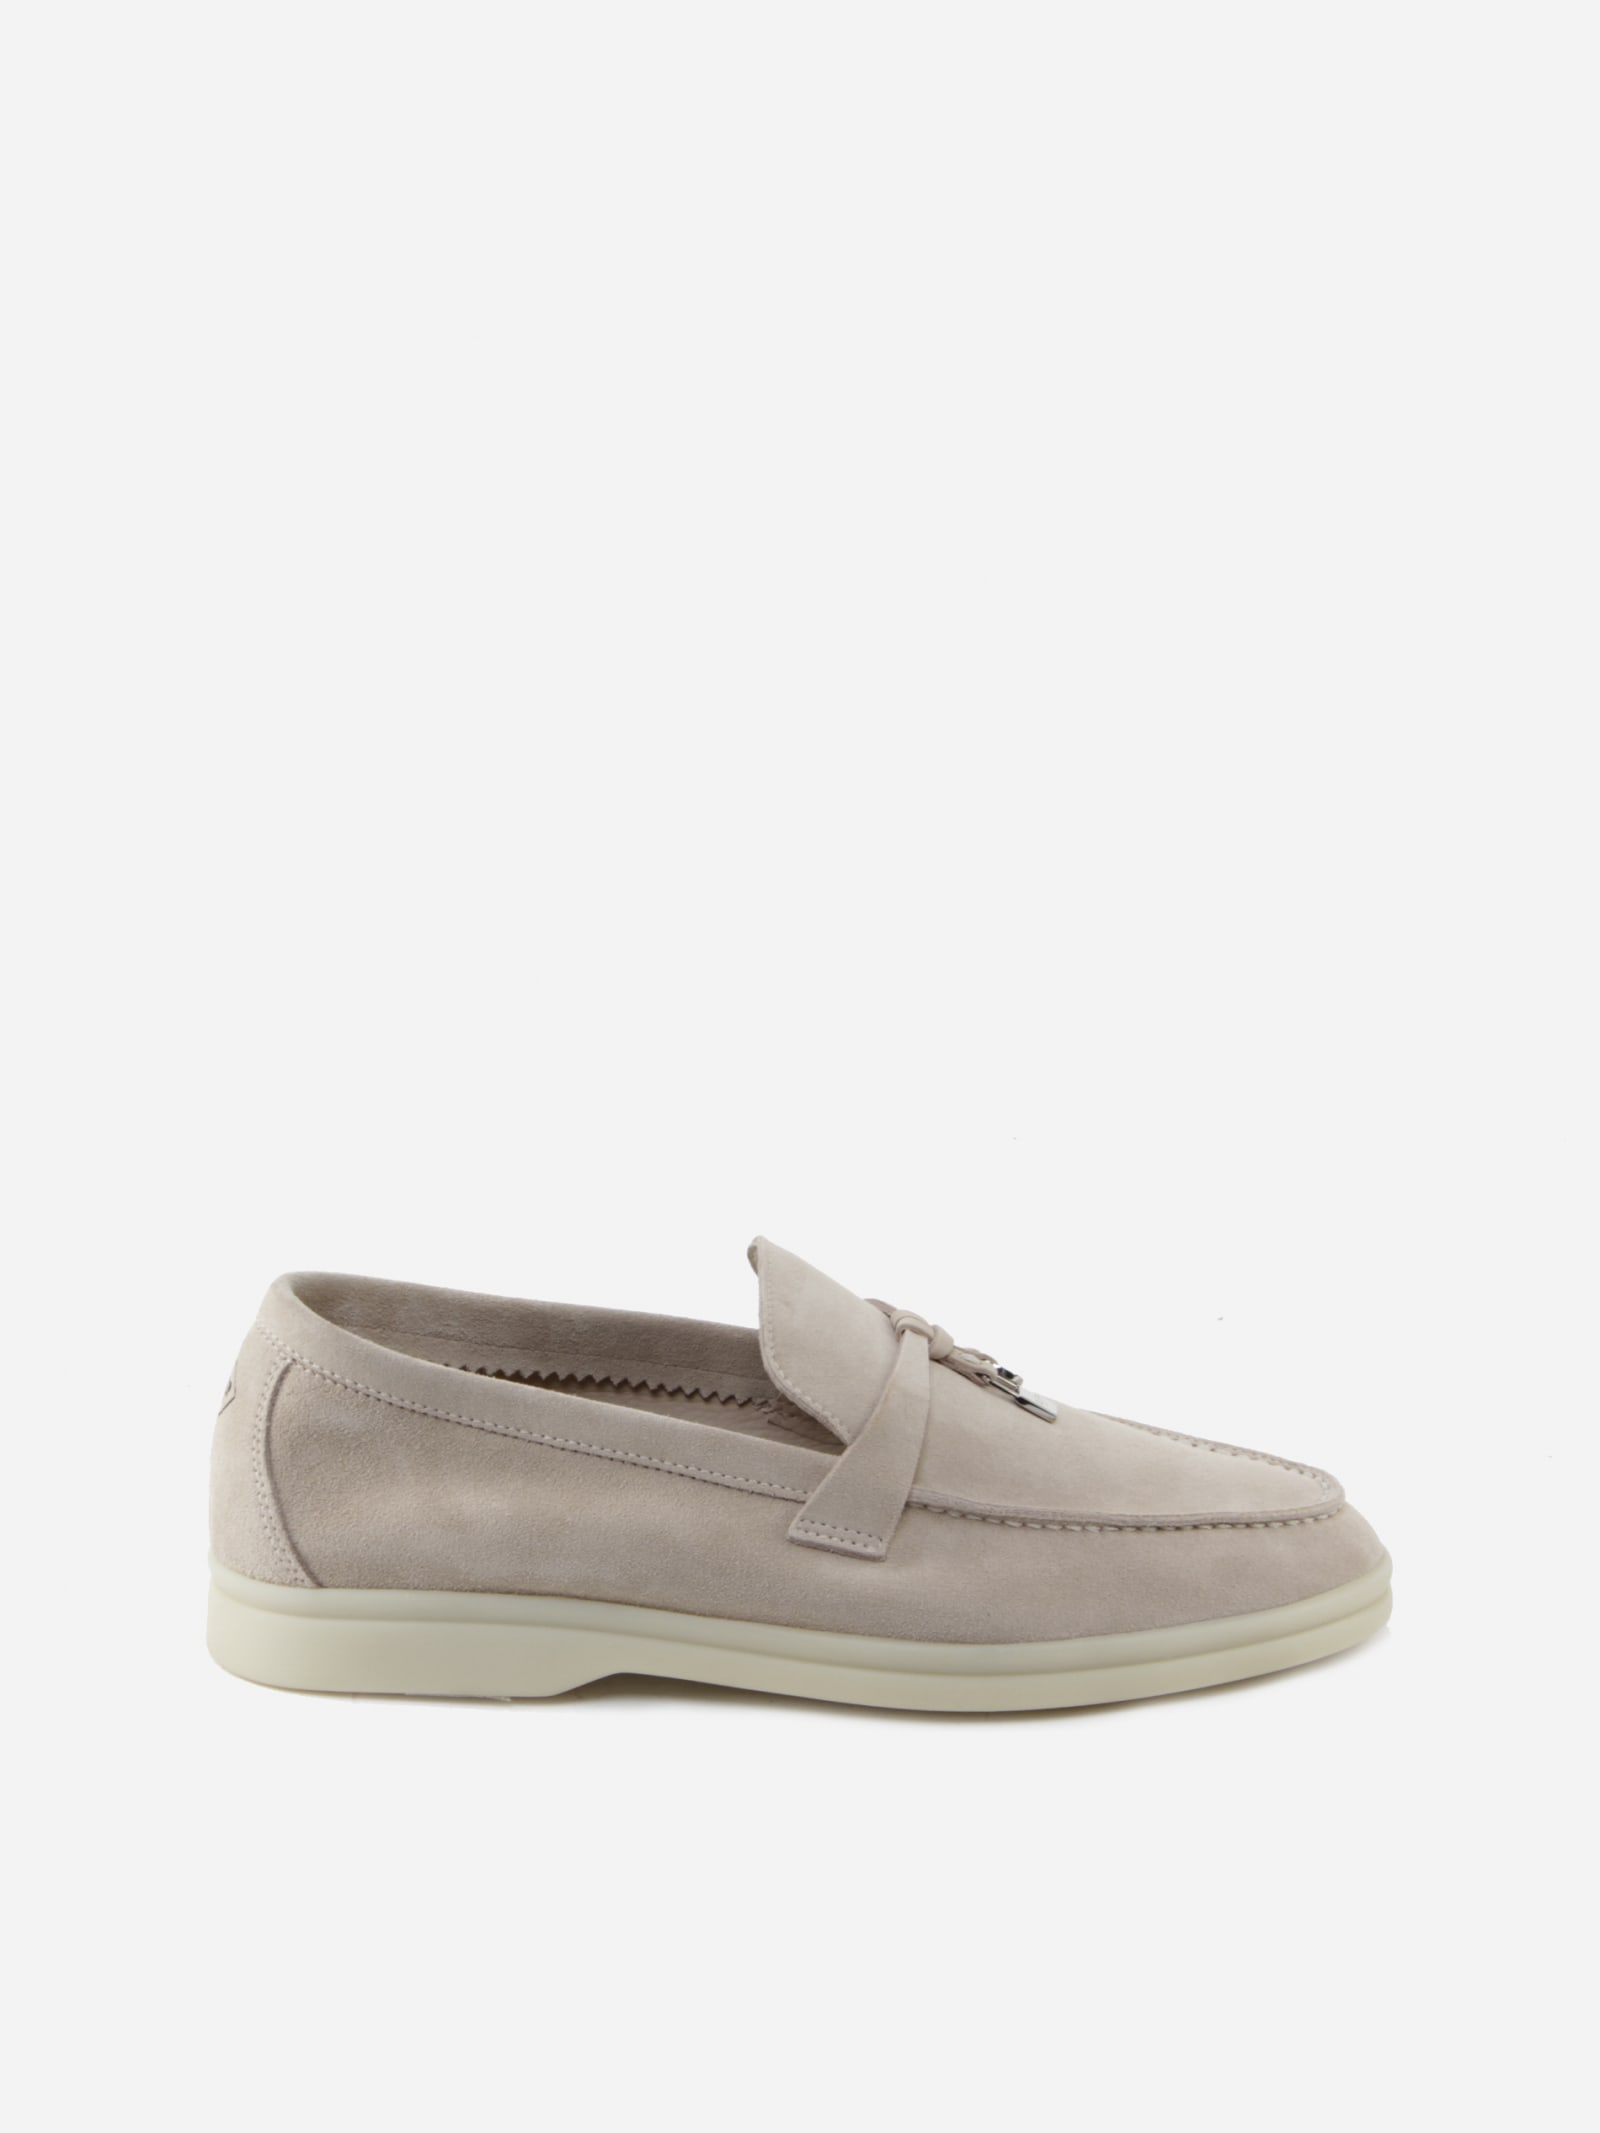 Loro Piana SUMMER CHARMS WALK MOCCASIN IN UNLINED SUEDE